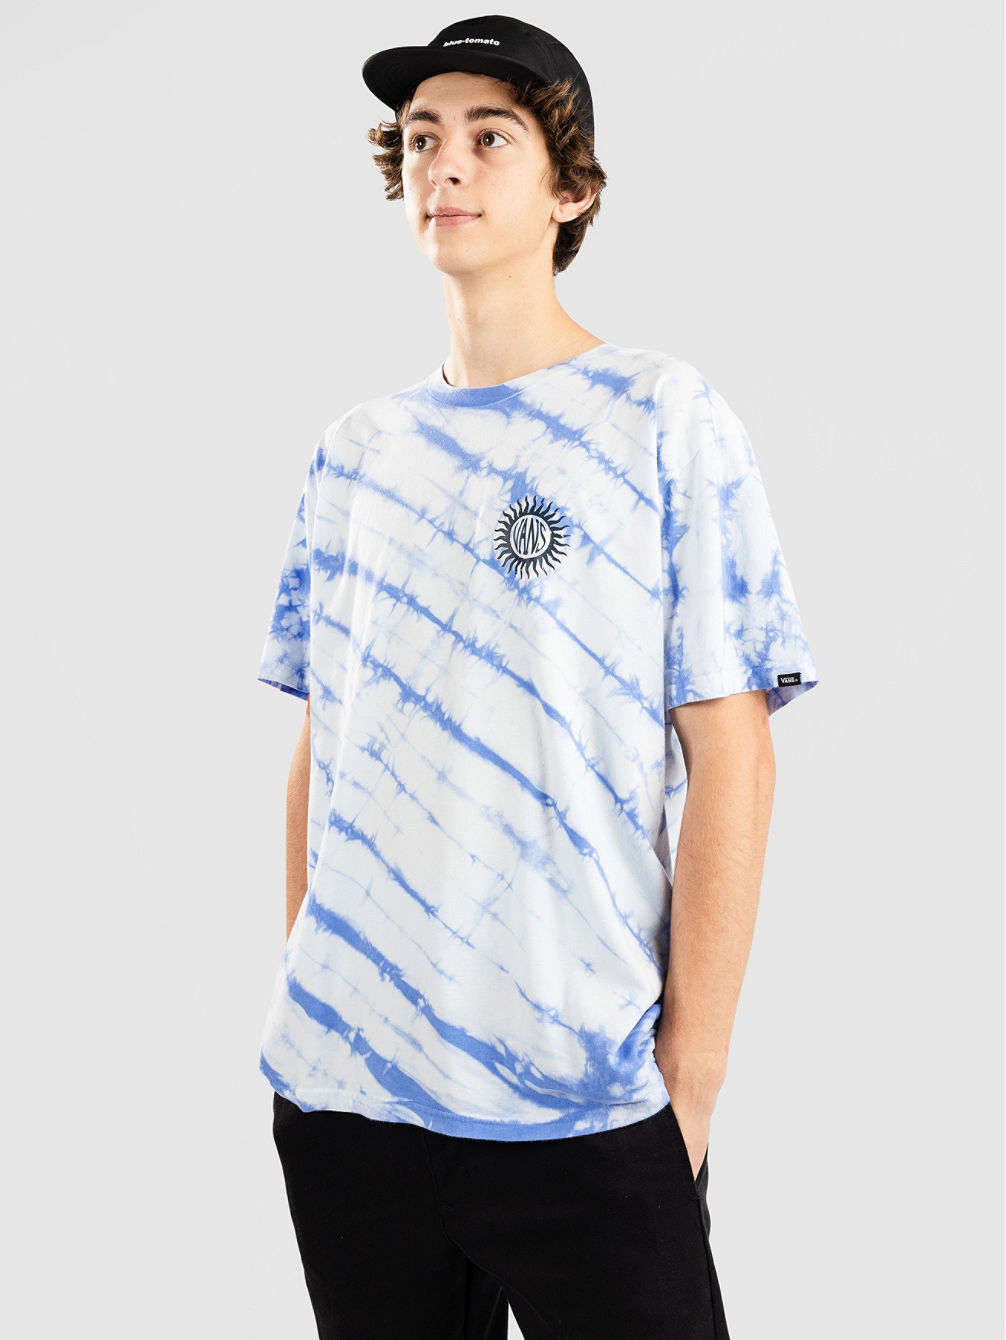 Trippy Thoughts Tie Dye Camiseta